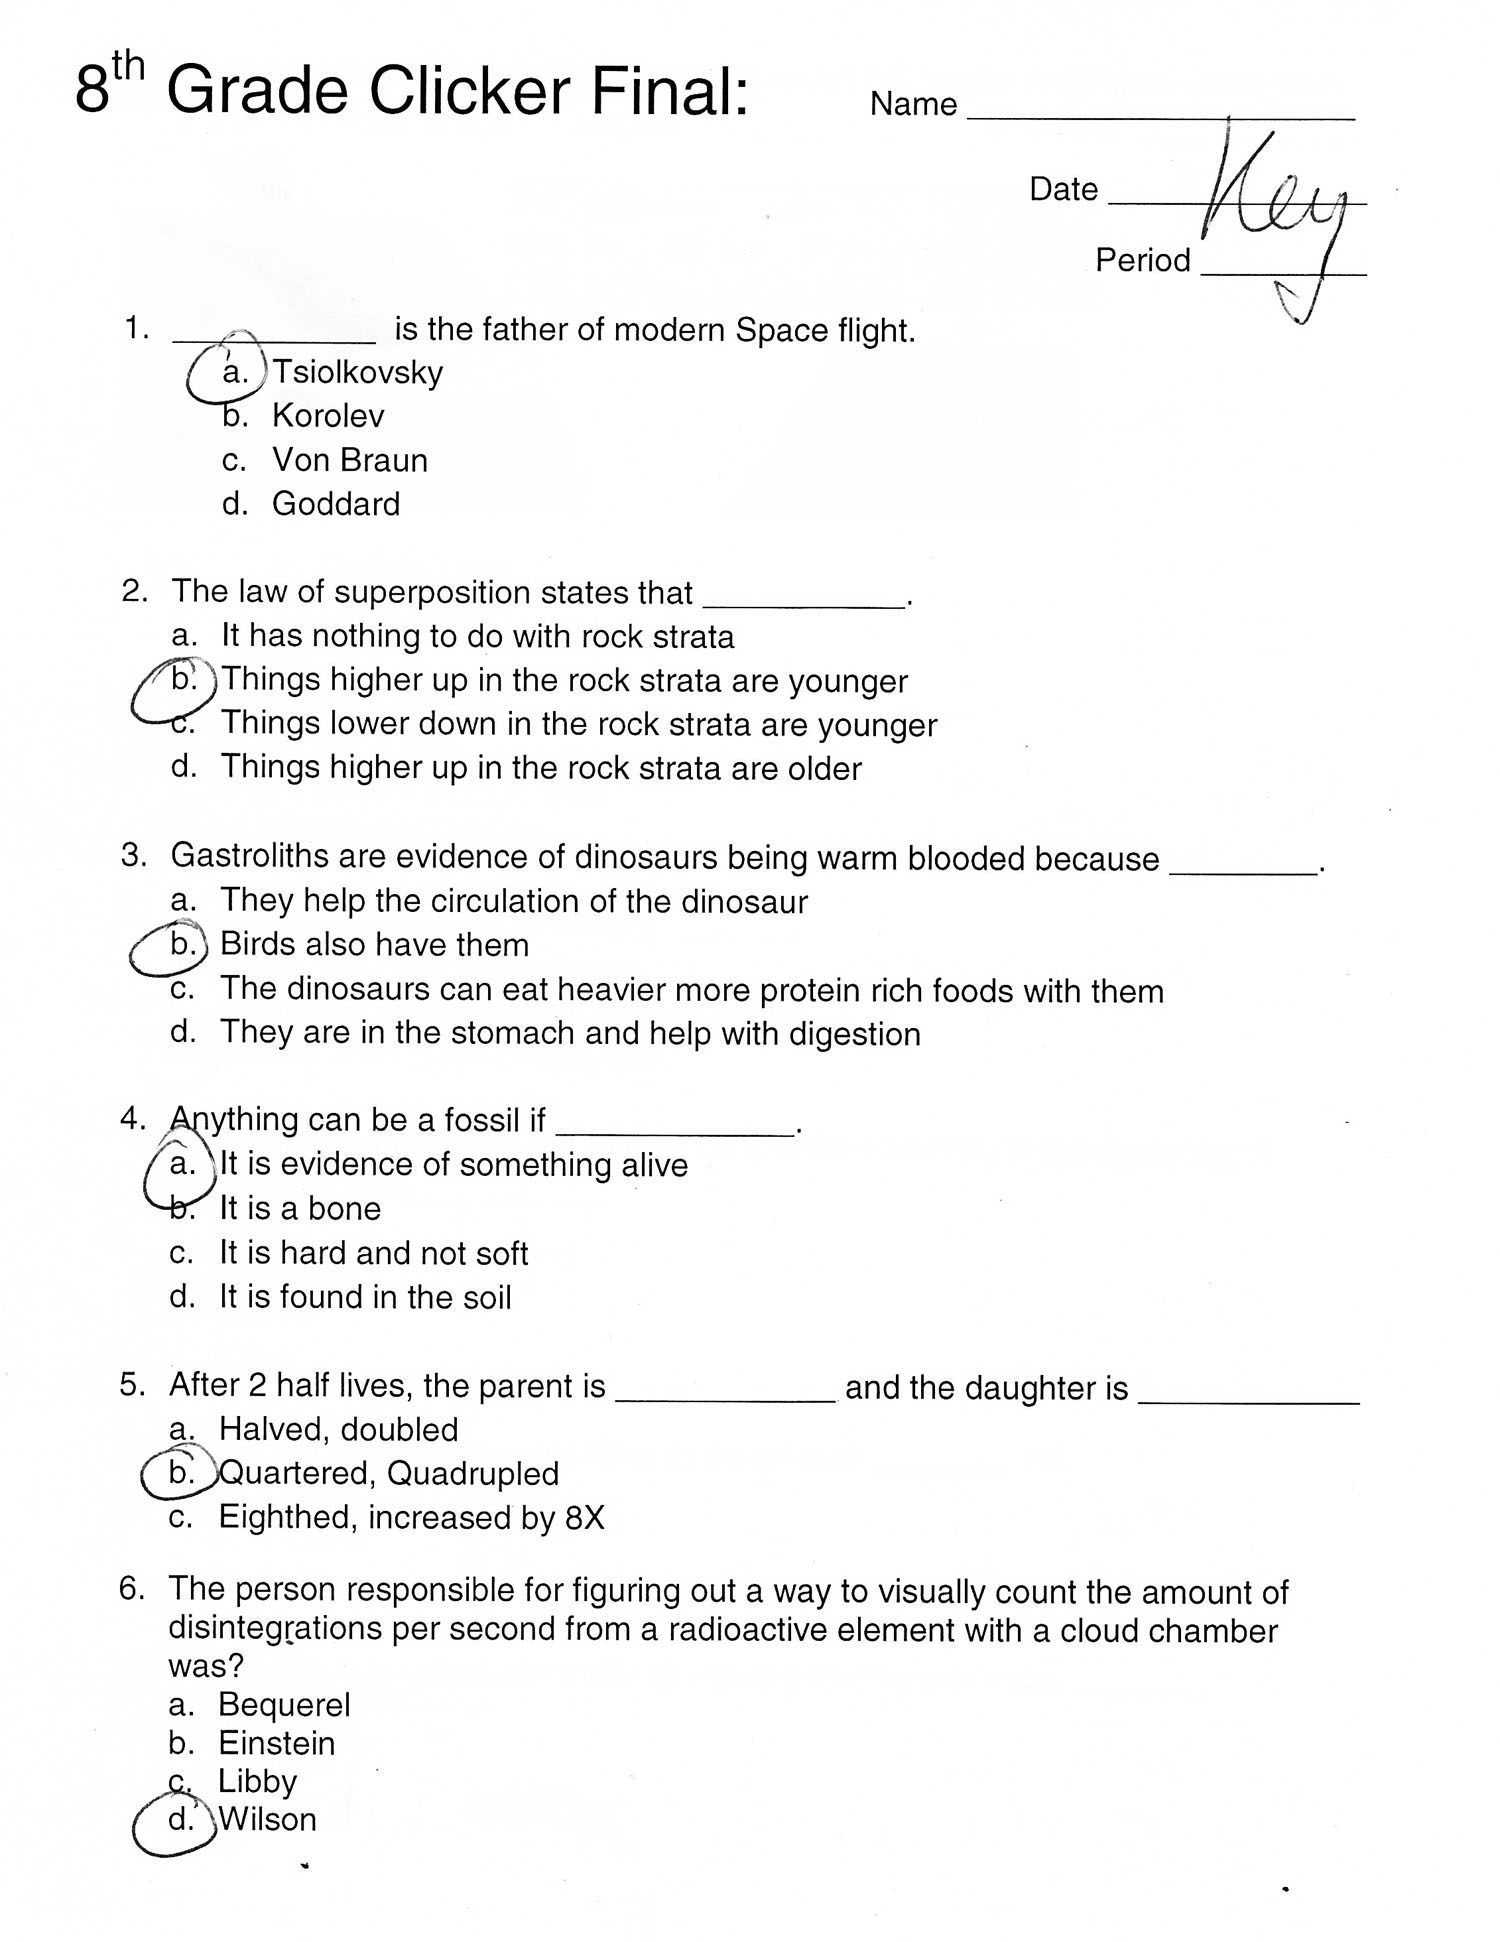 8th Grade Science Worksheets Printable With Answers